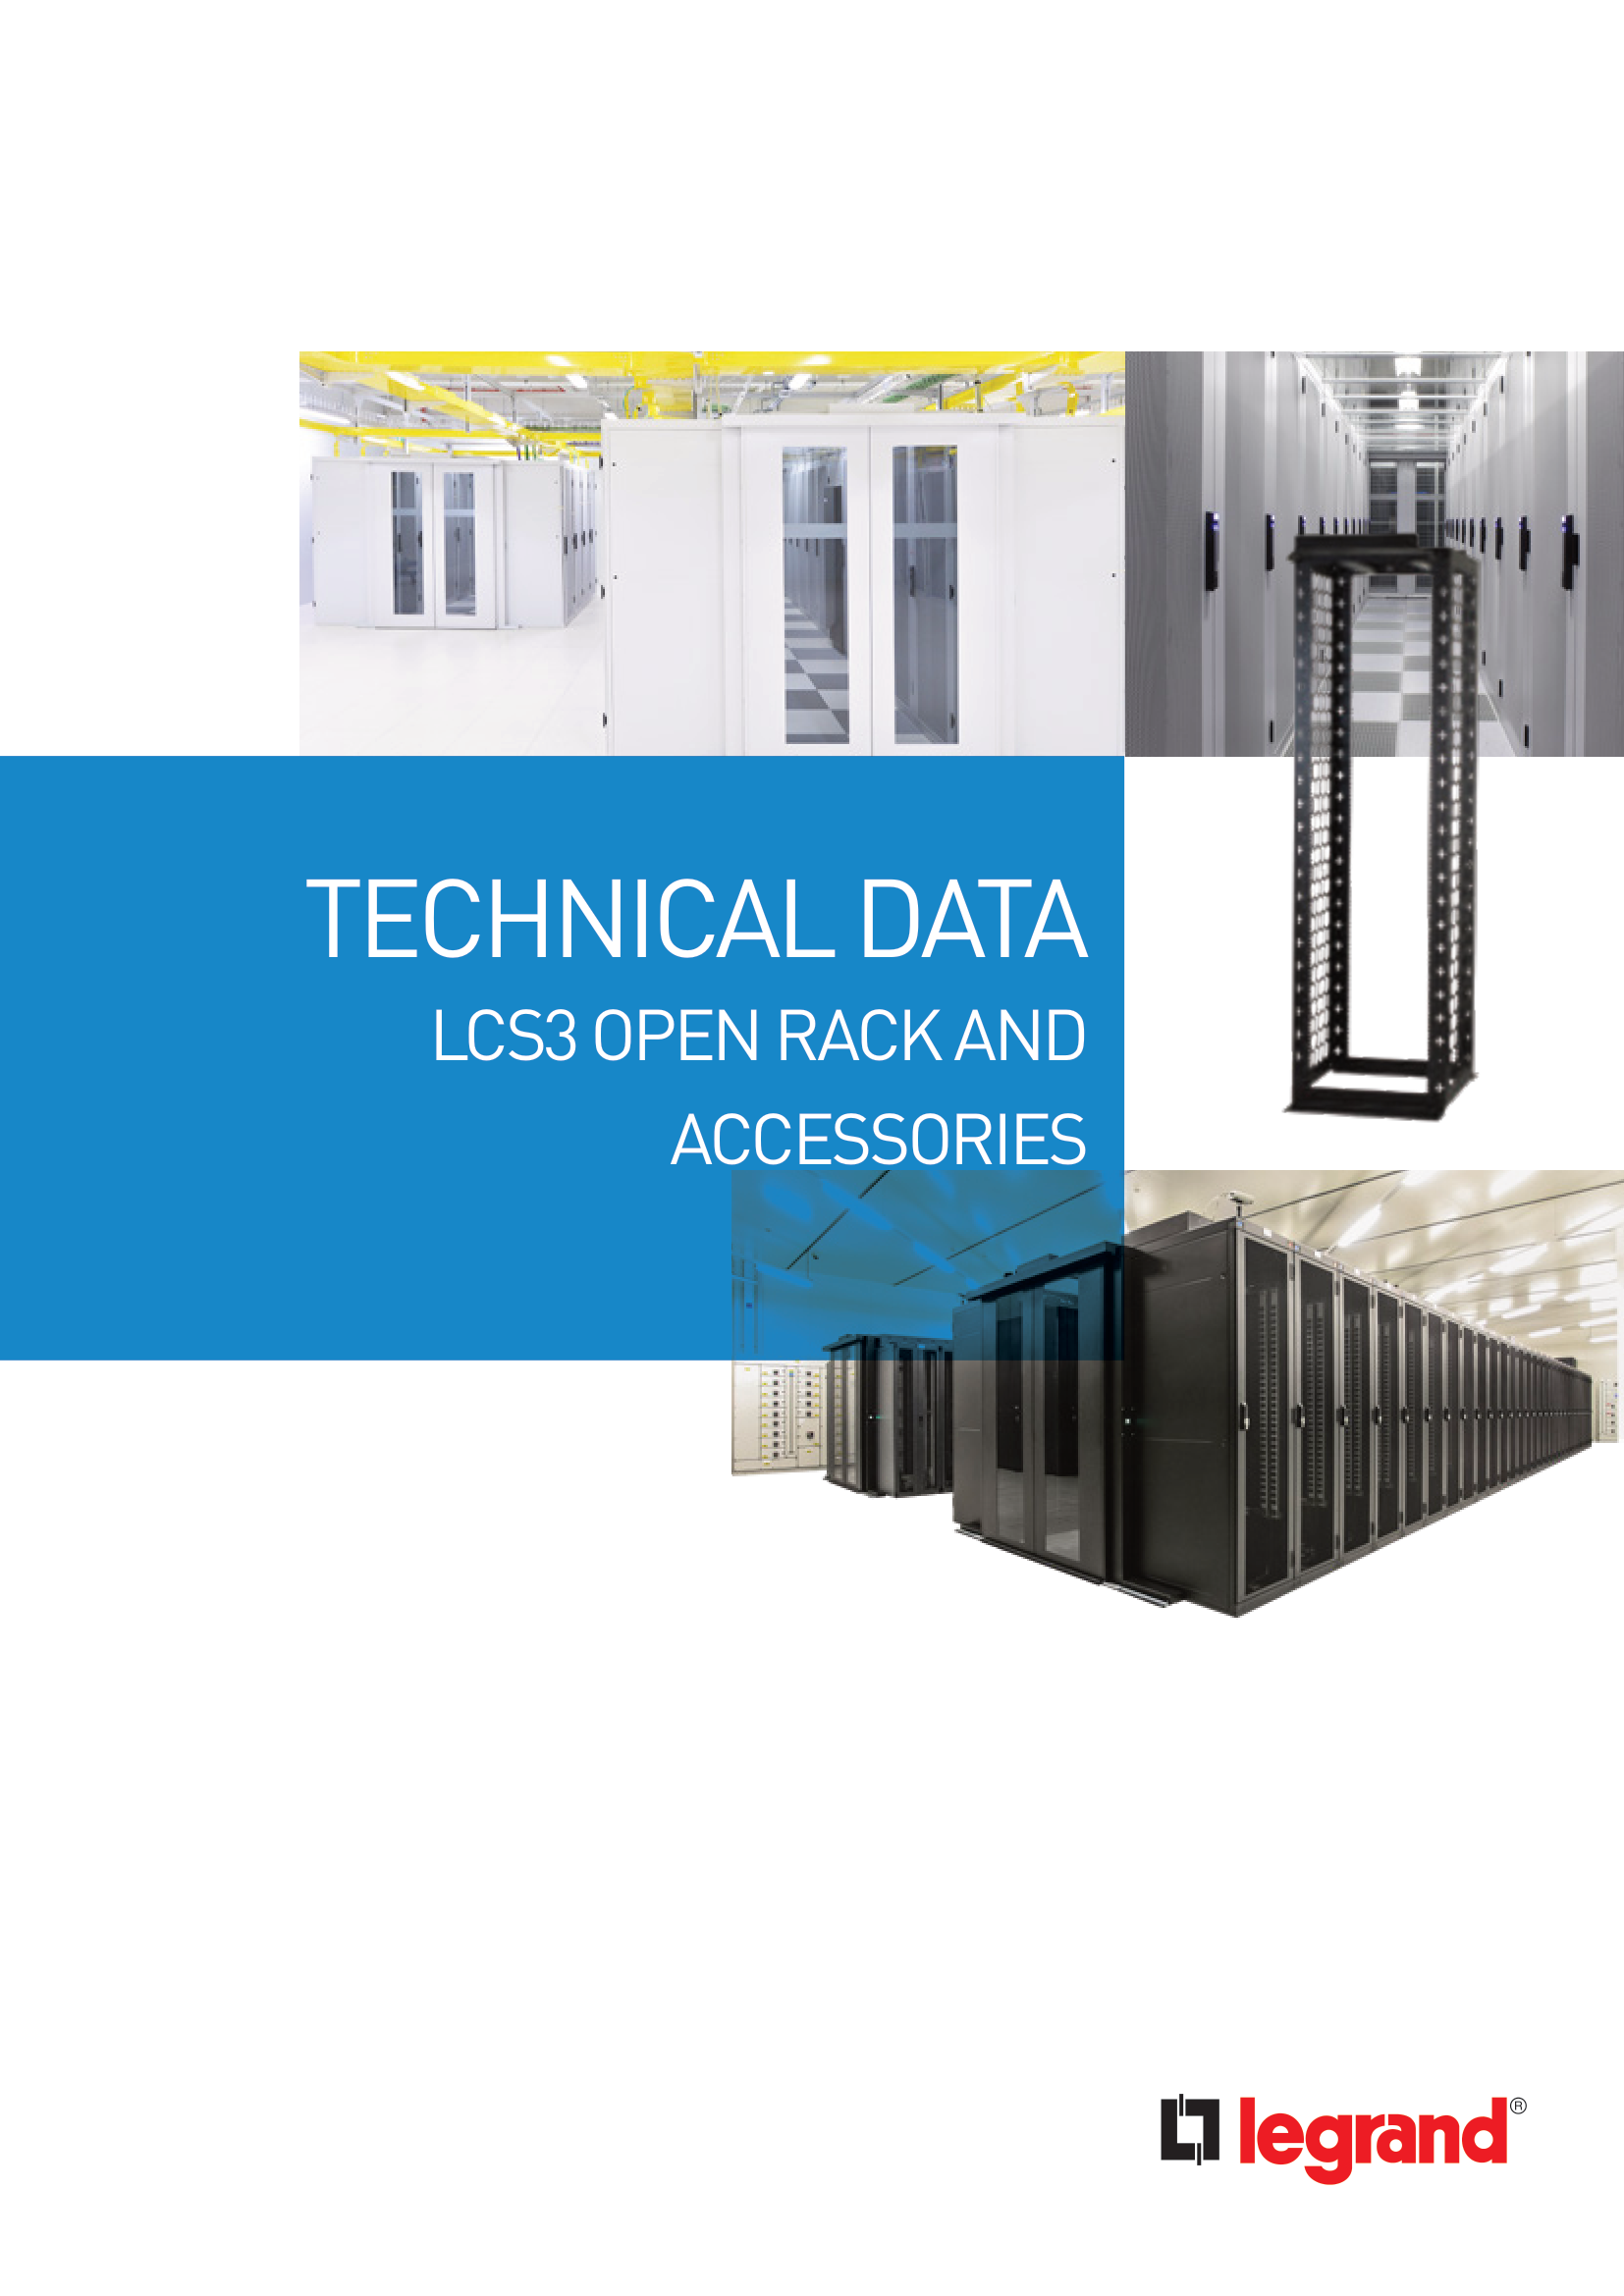 datasheet_lcs3_legrand_cabling_system_open_rack.png